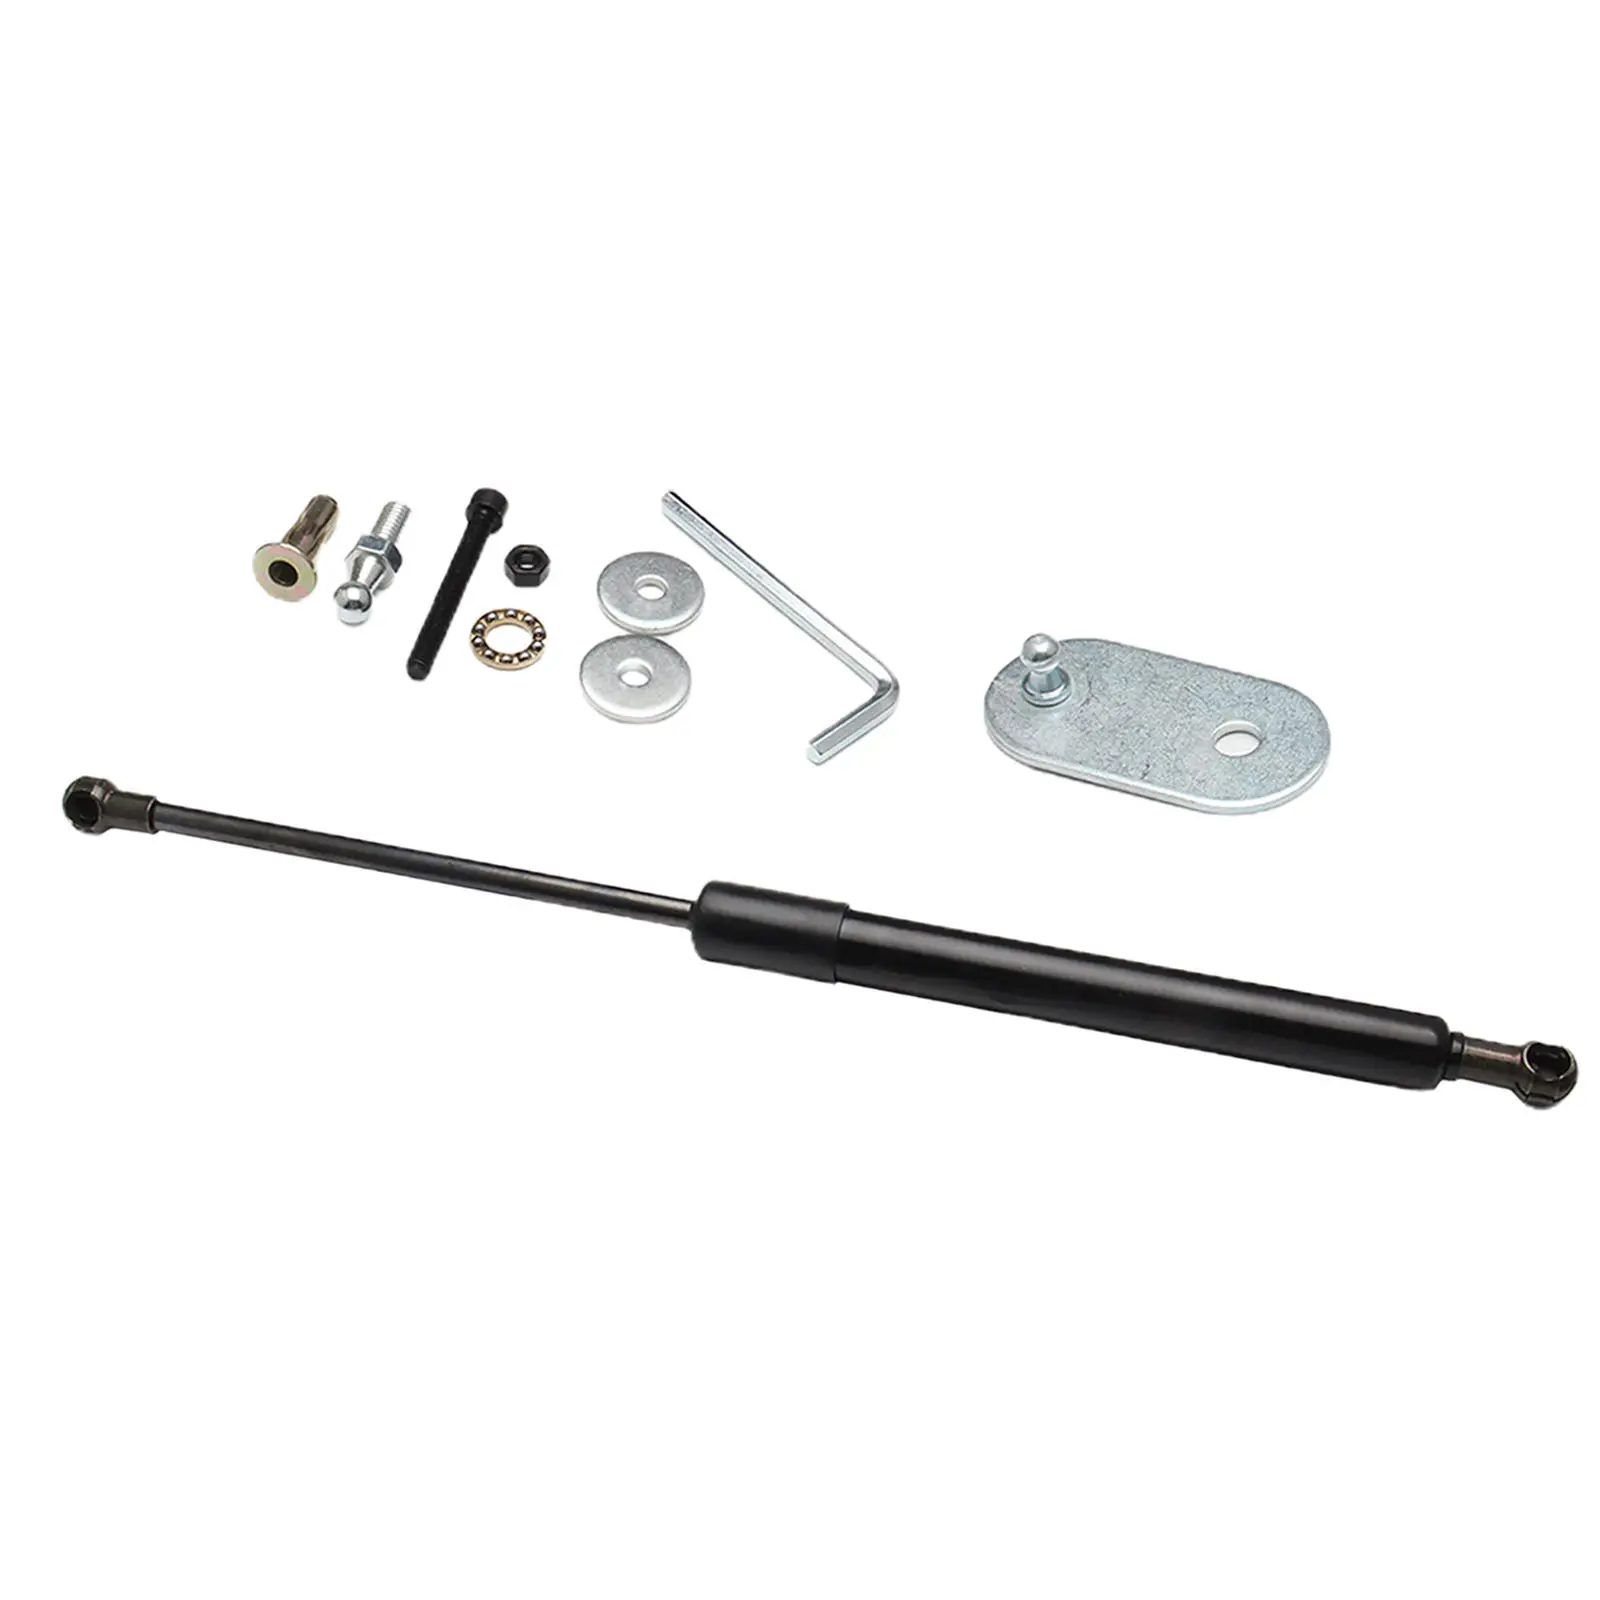 Durable Steel Tailgate Assist Spring Shock Struts Bar Lift Support for Ford F-150 04 05 06 07 08 09 10-14